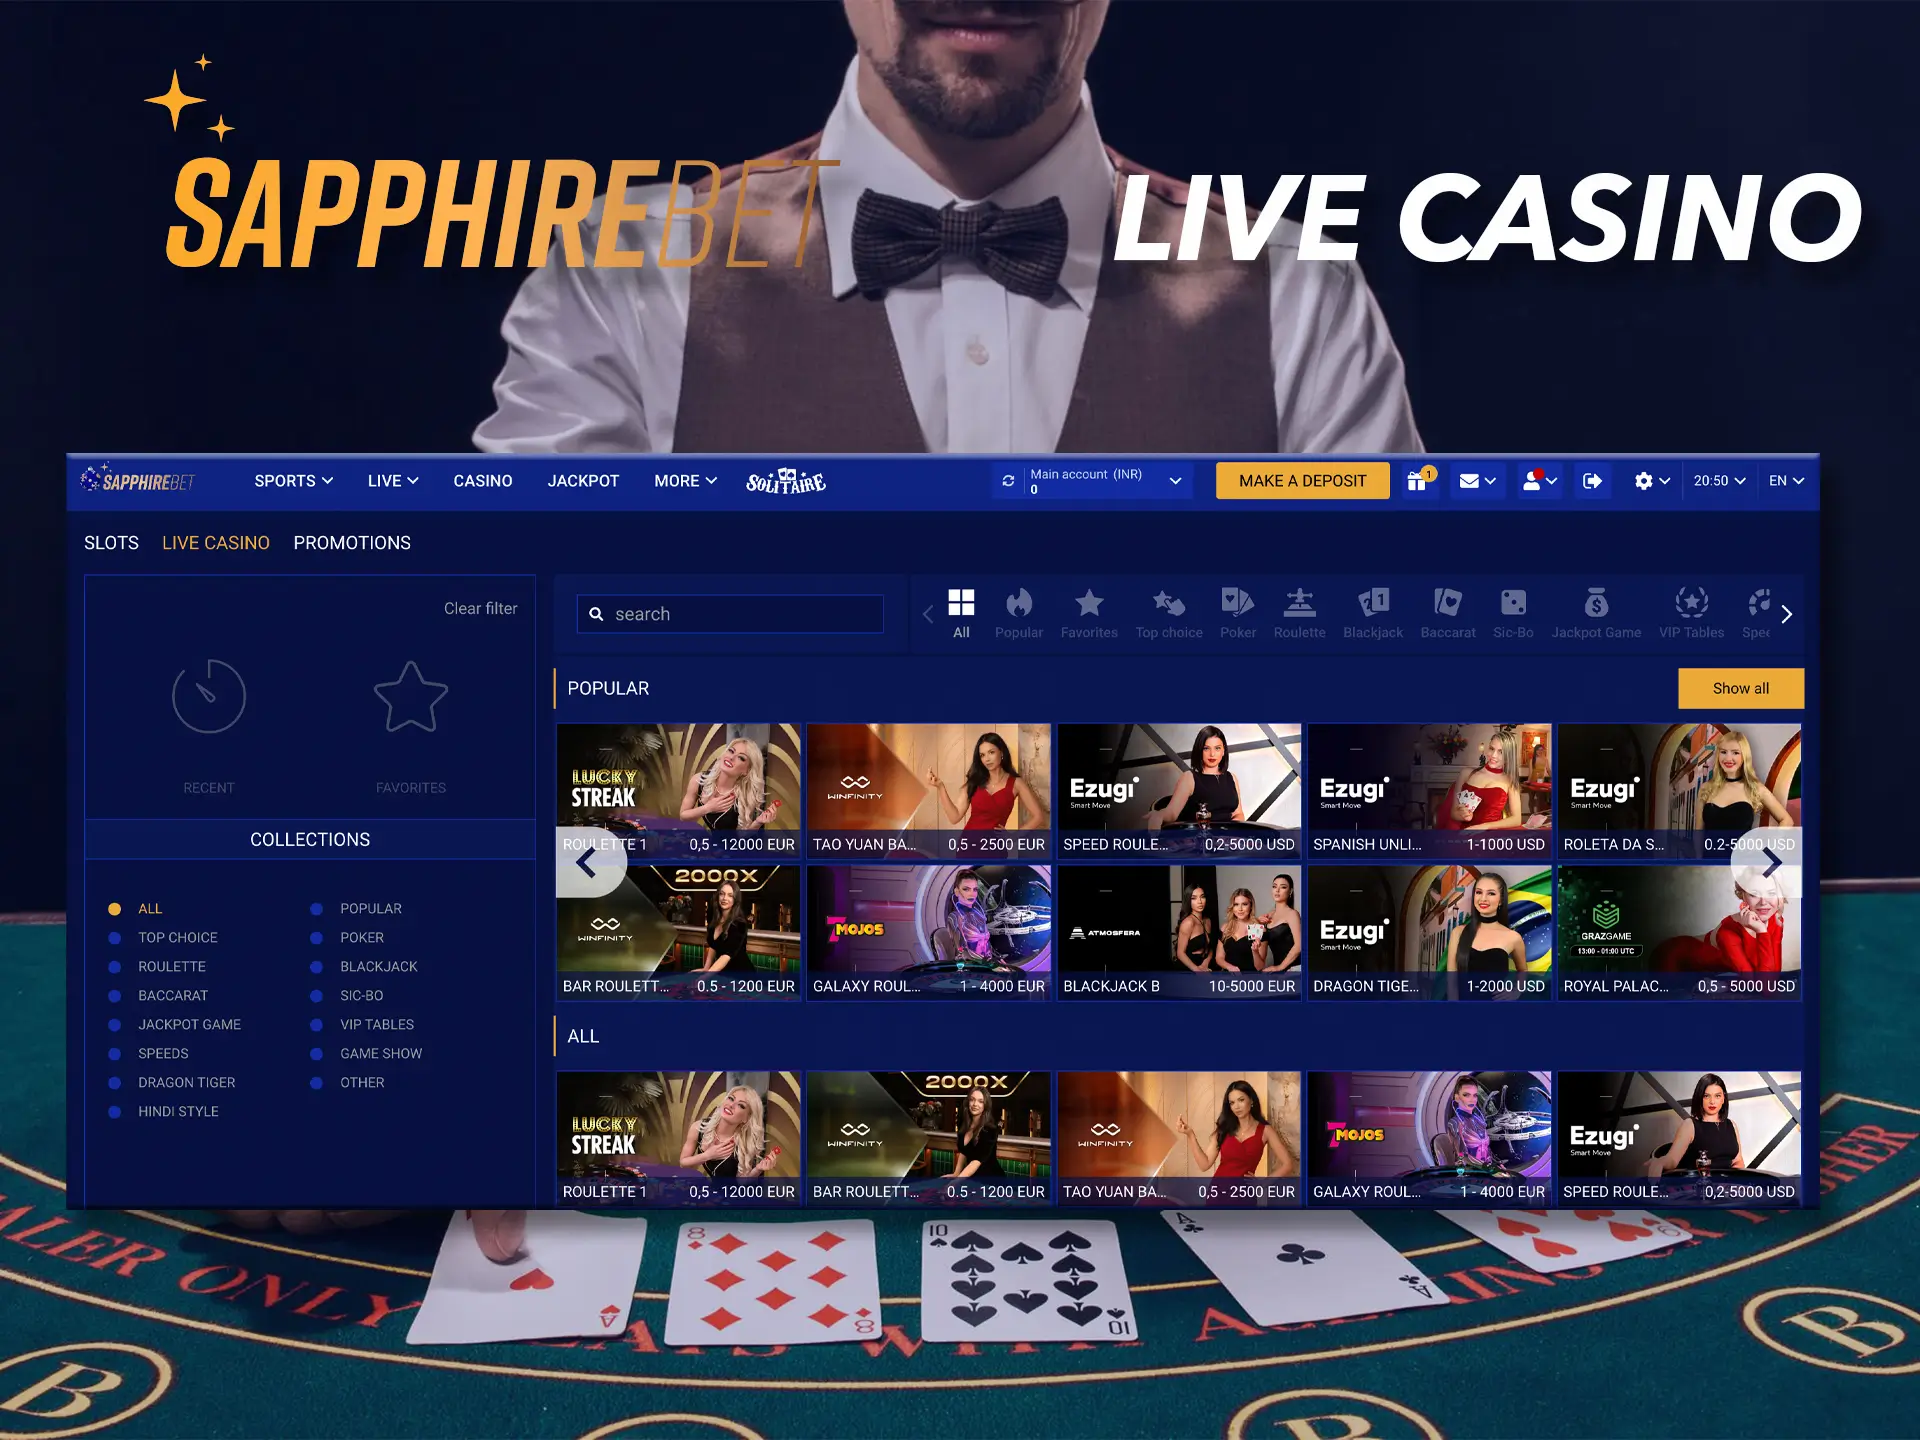 Participate in games with real dealers at Sapphirebet Casino.